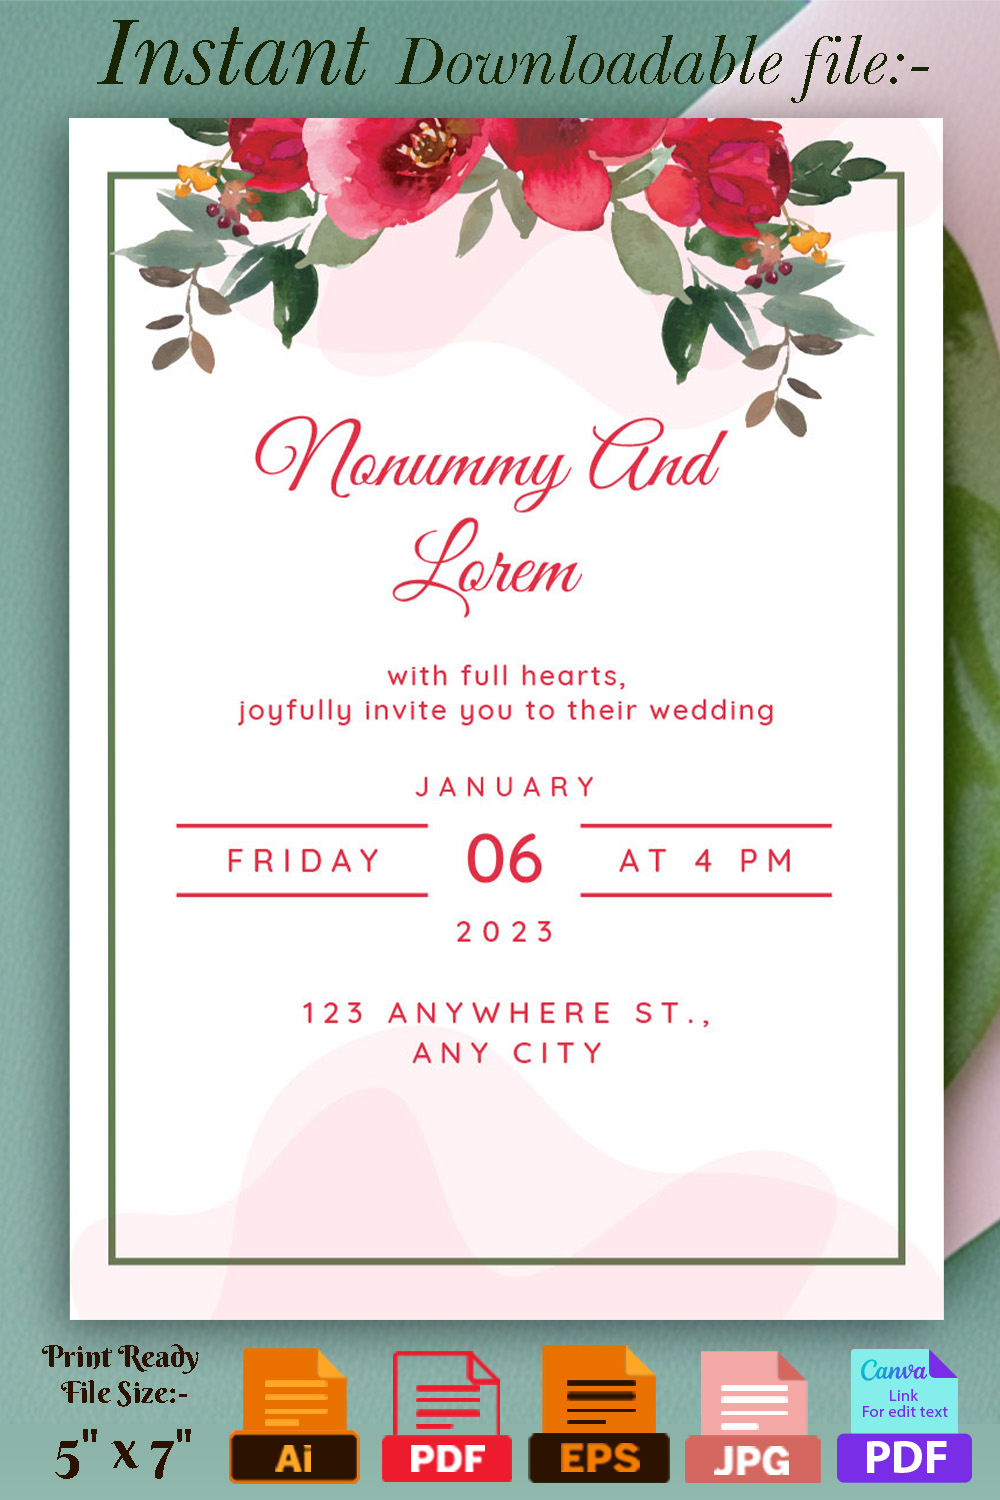 Image of enchanting wedding invitation with watercolor flowers.